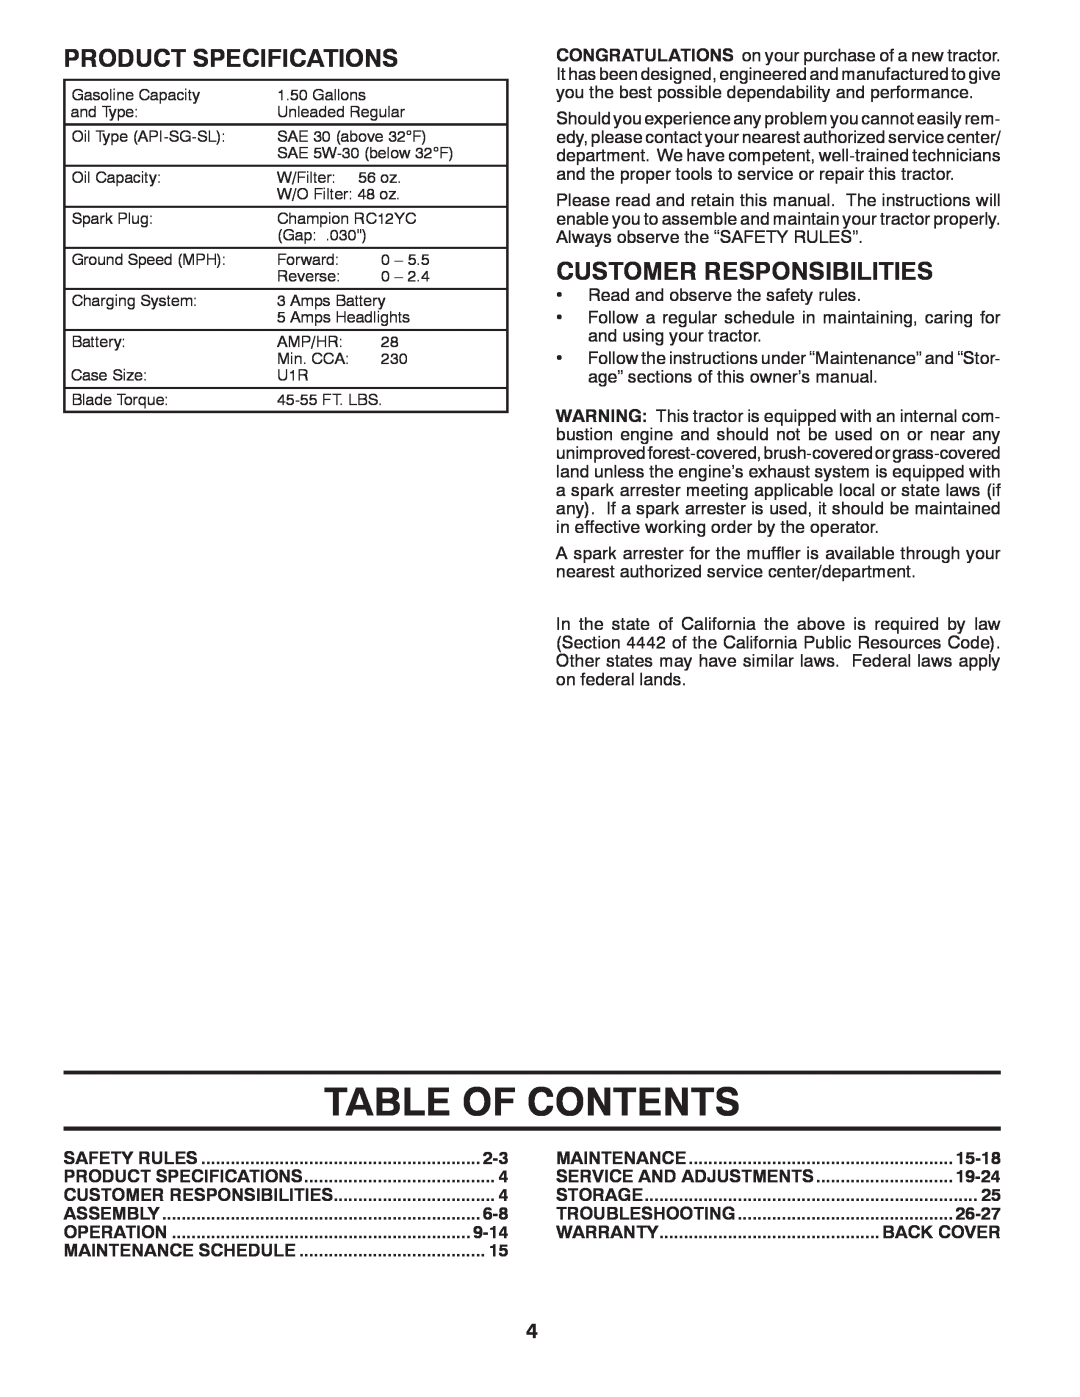 Poulan 411287 manual Table Of Contents, Product Specifications, Customer Responsibilities 